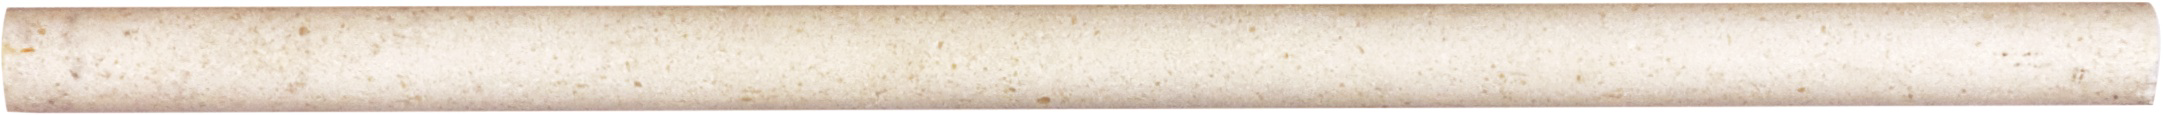 limestone pattern natural stone pencil molding from serene ivory anatolia collection distributed by surface group international honed finish straight edge edge 5_8x12 bar shape